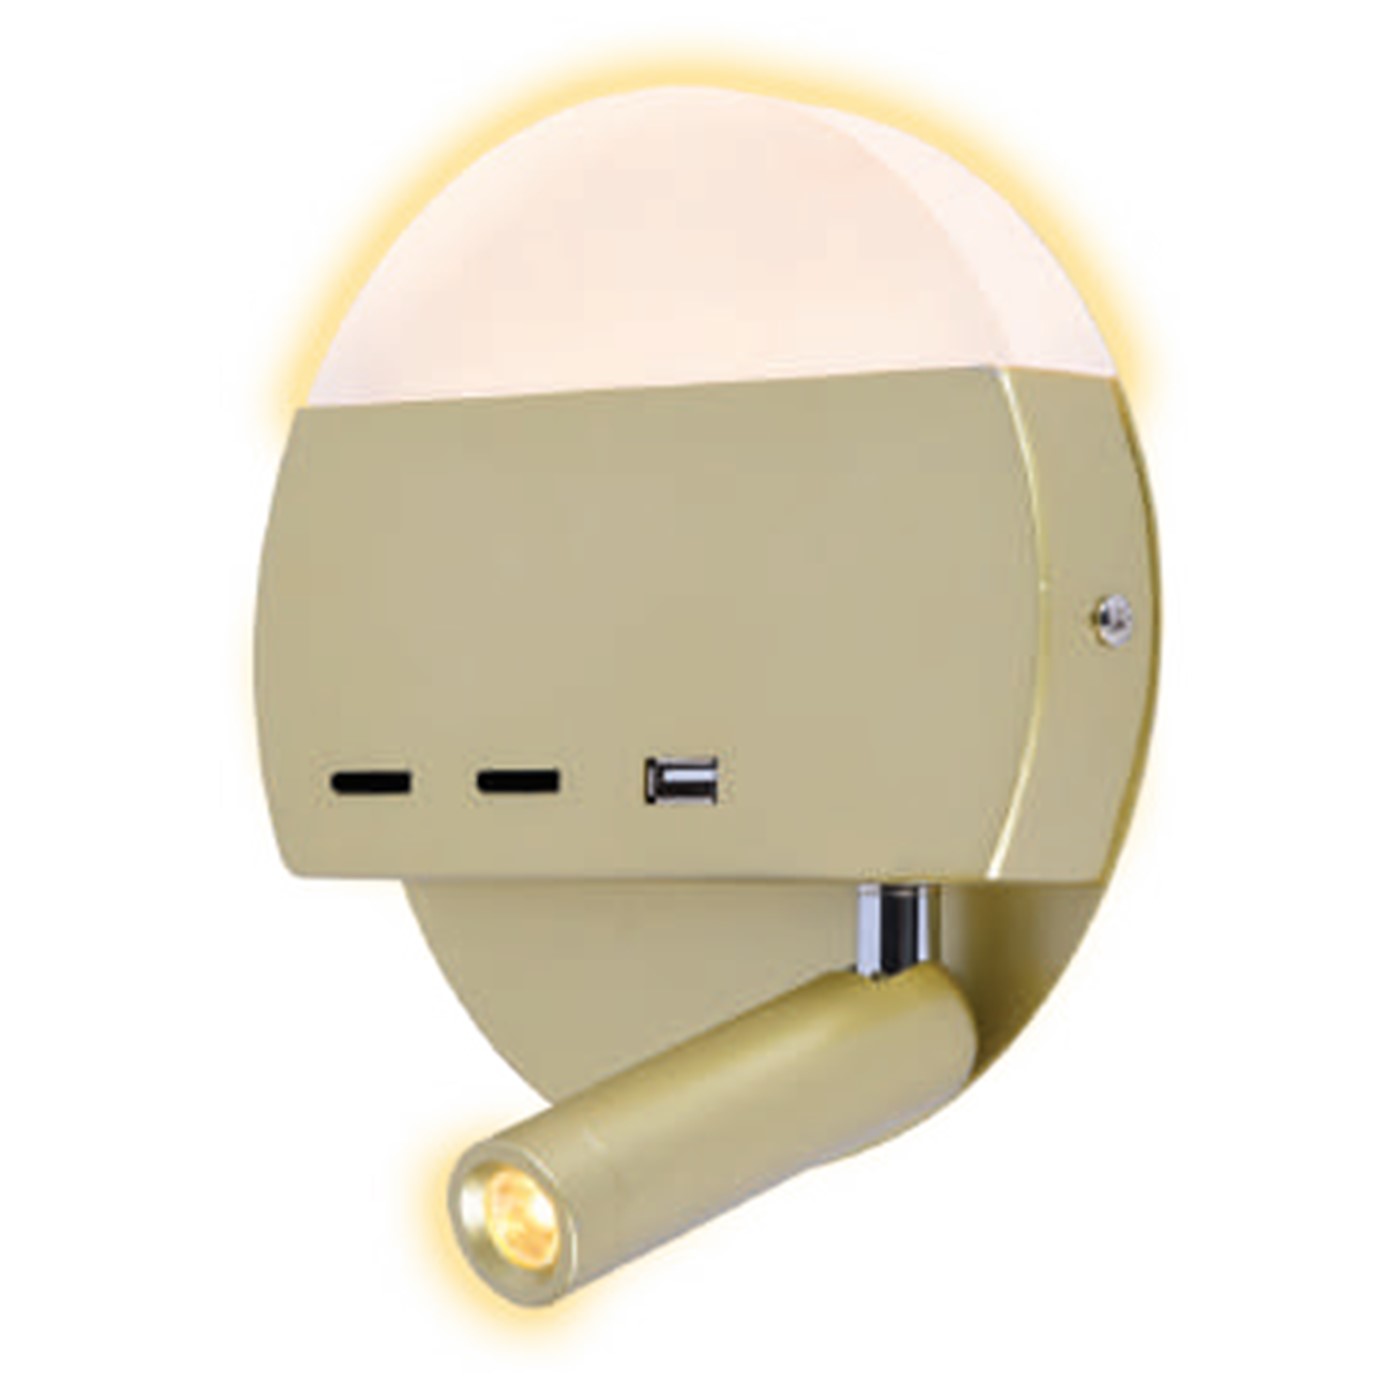 BK-03-015 Bedside Wall Light with USB Charger